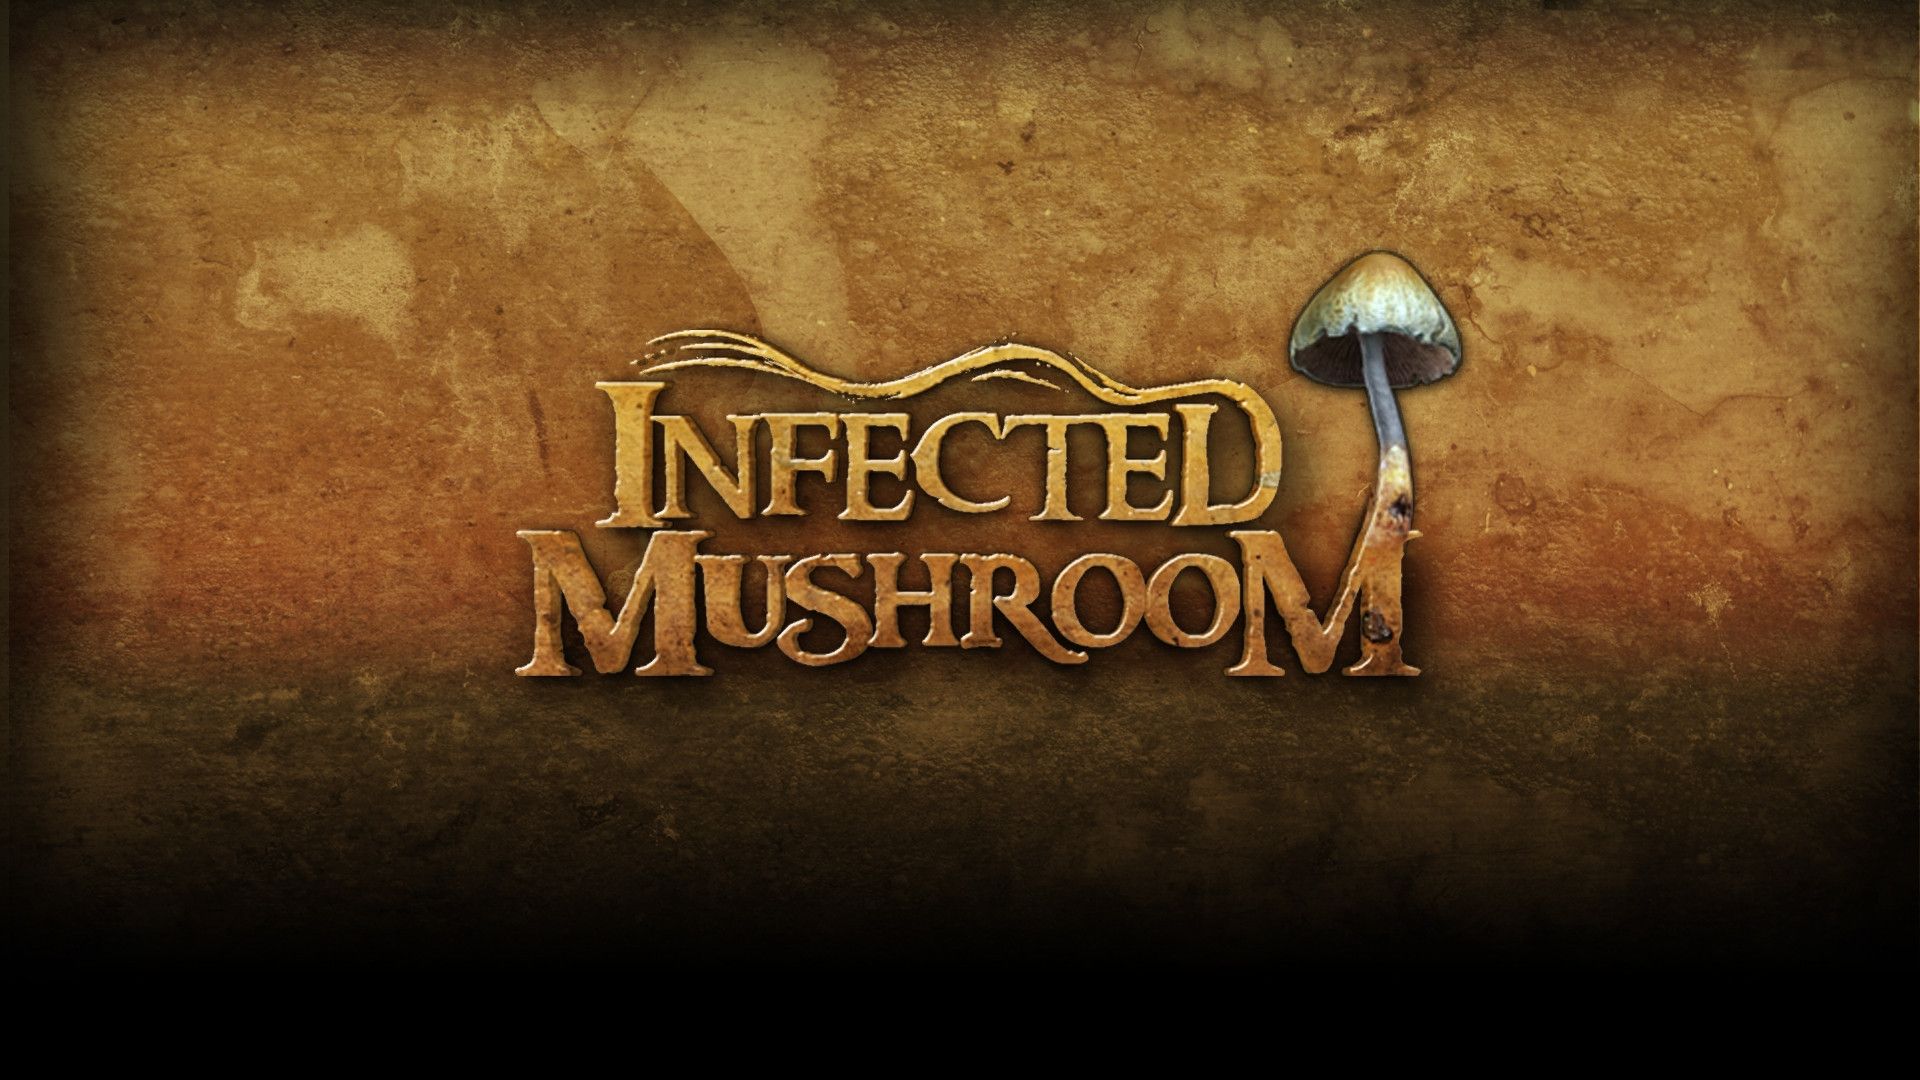 Infected Mushroom Letters Background Wallpaper Px